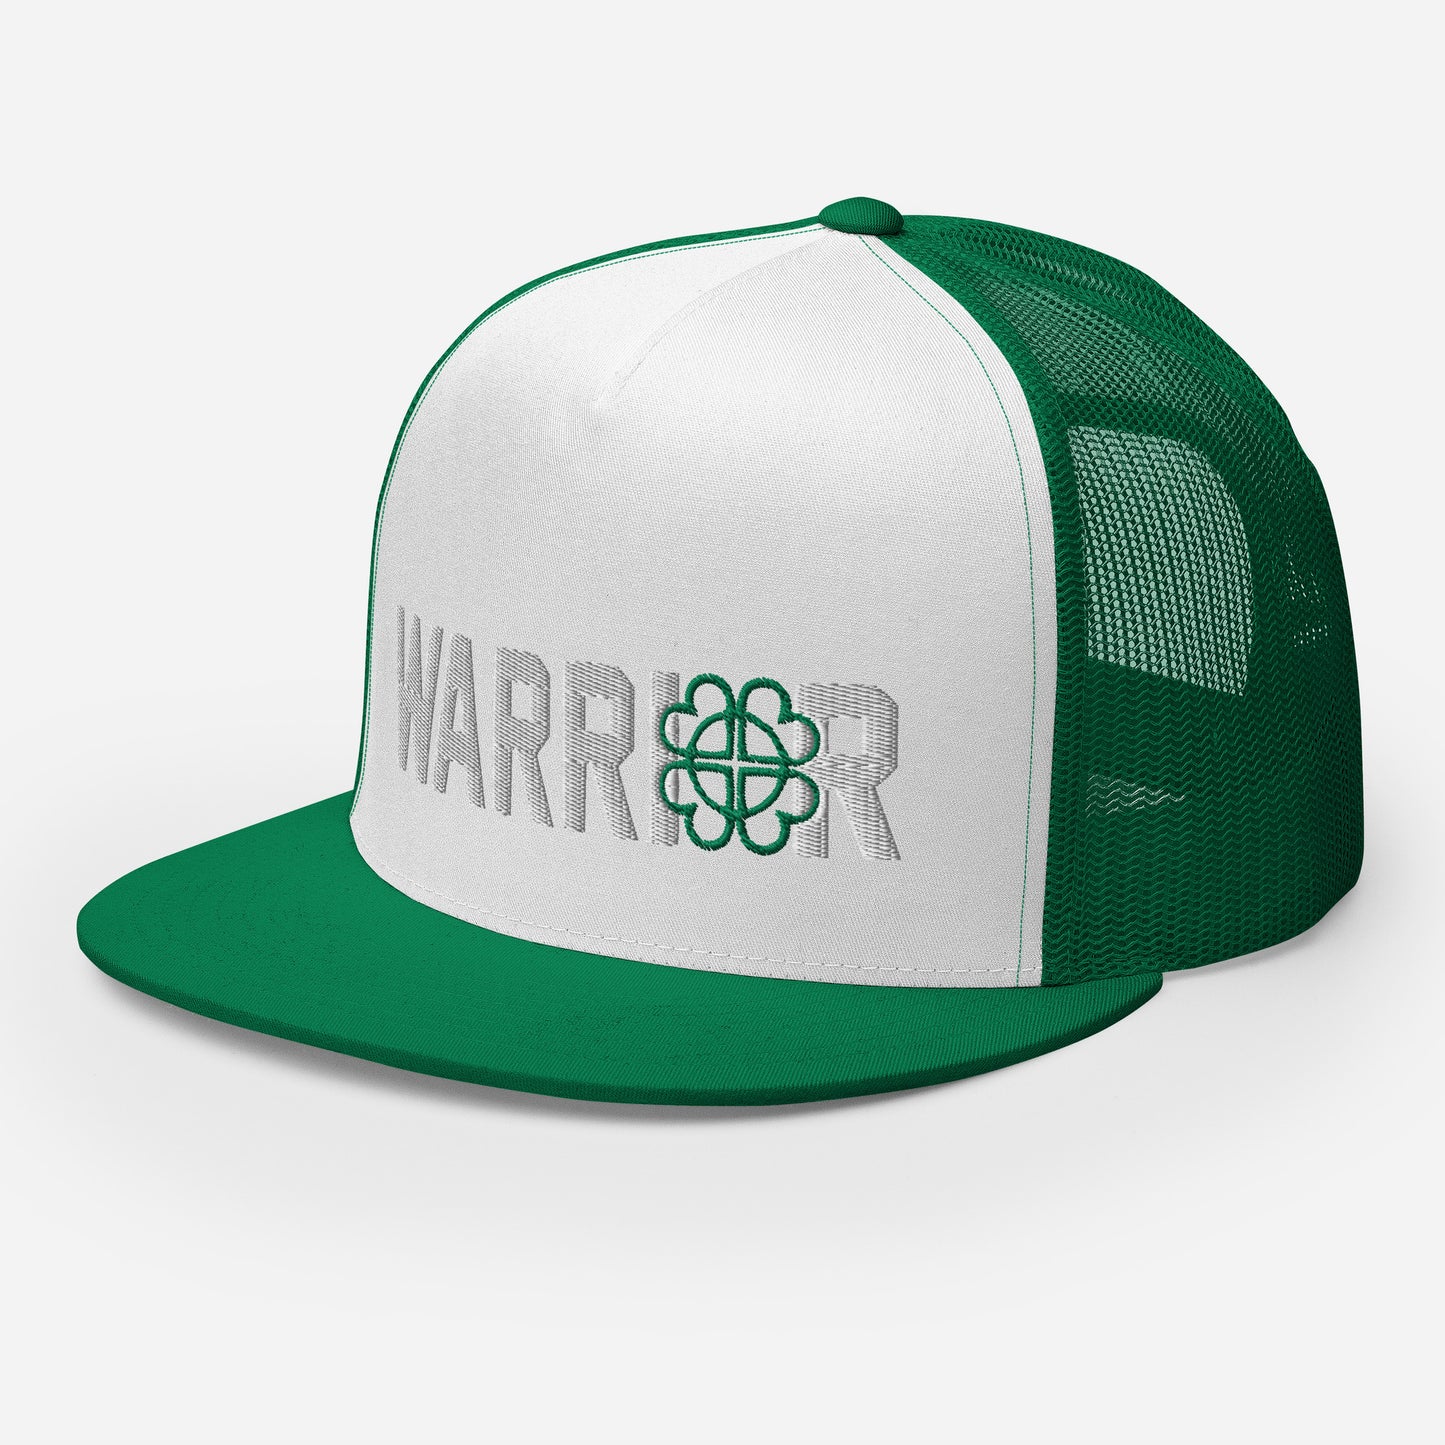 Green and White Trucker Hat with Green Logo